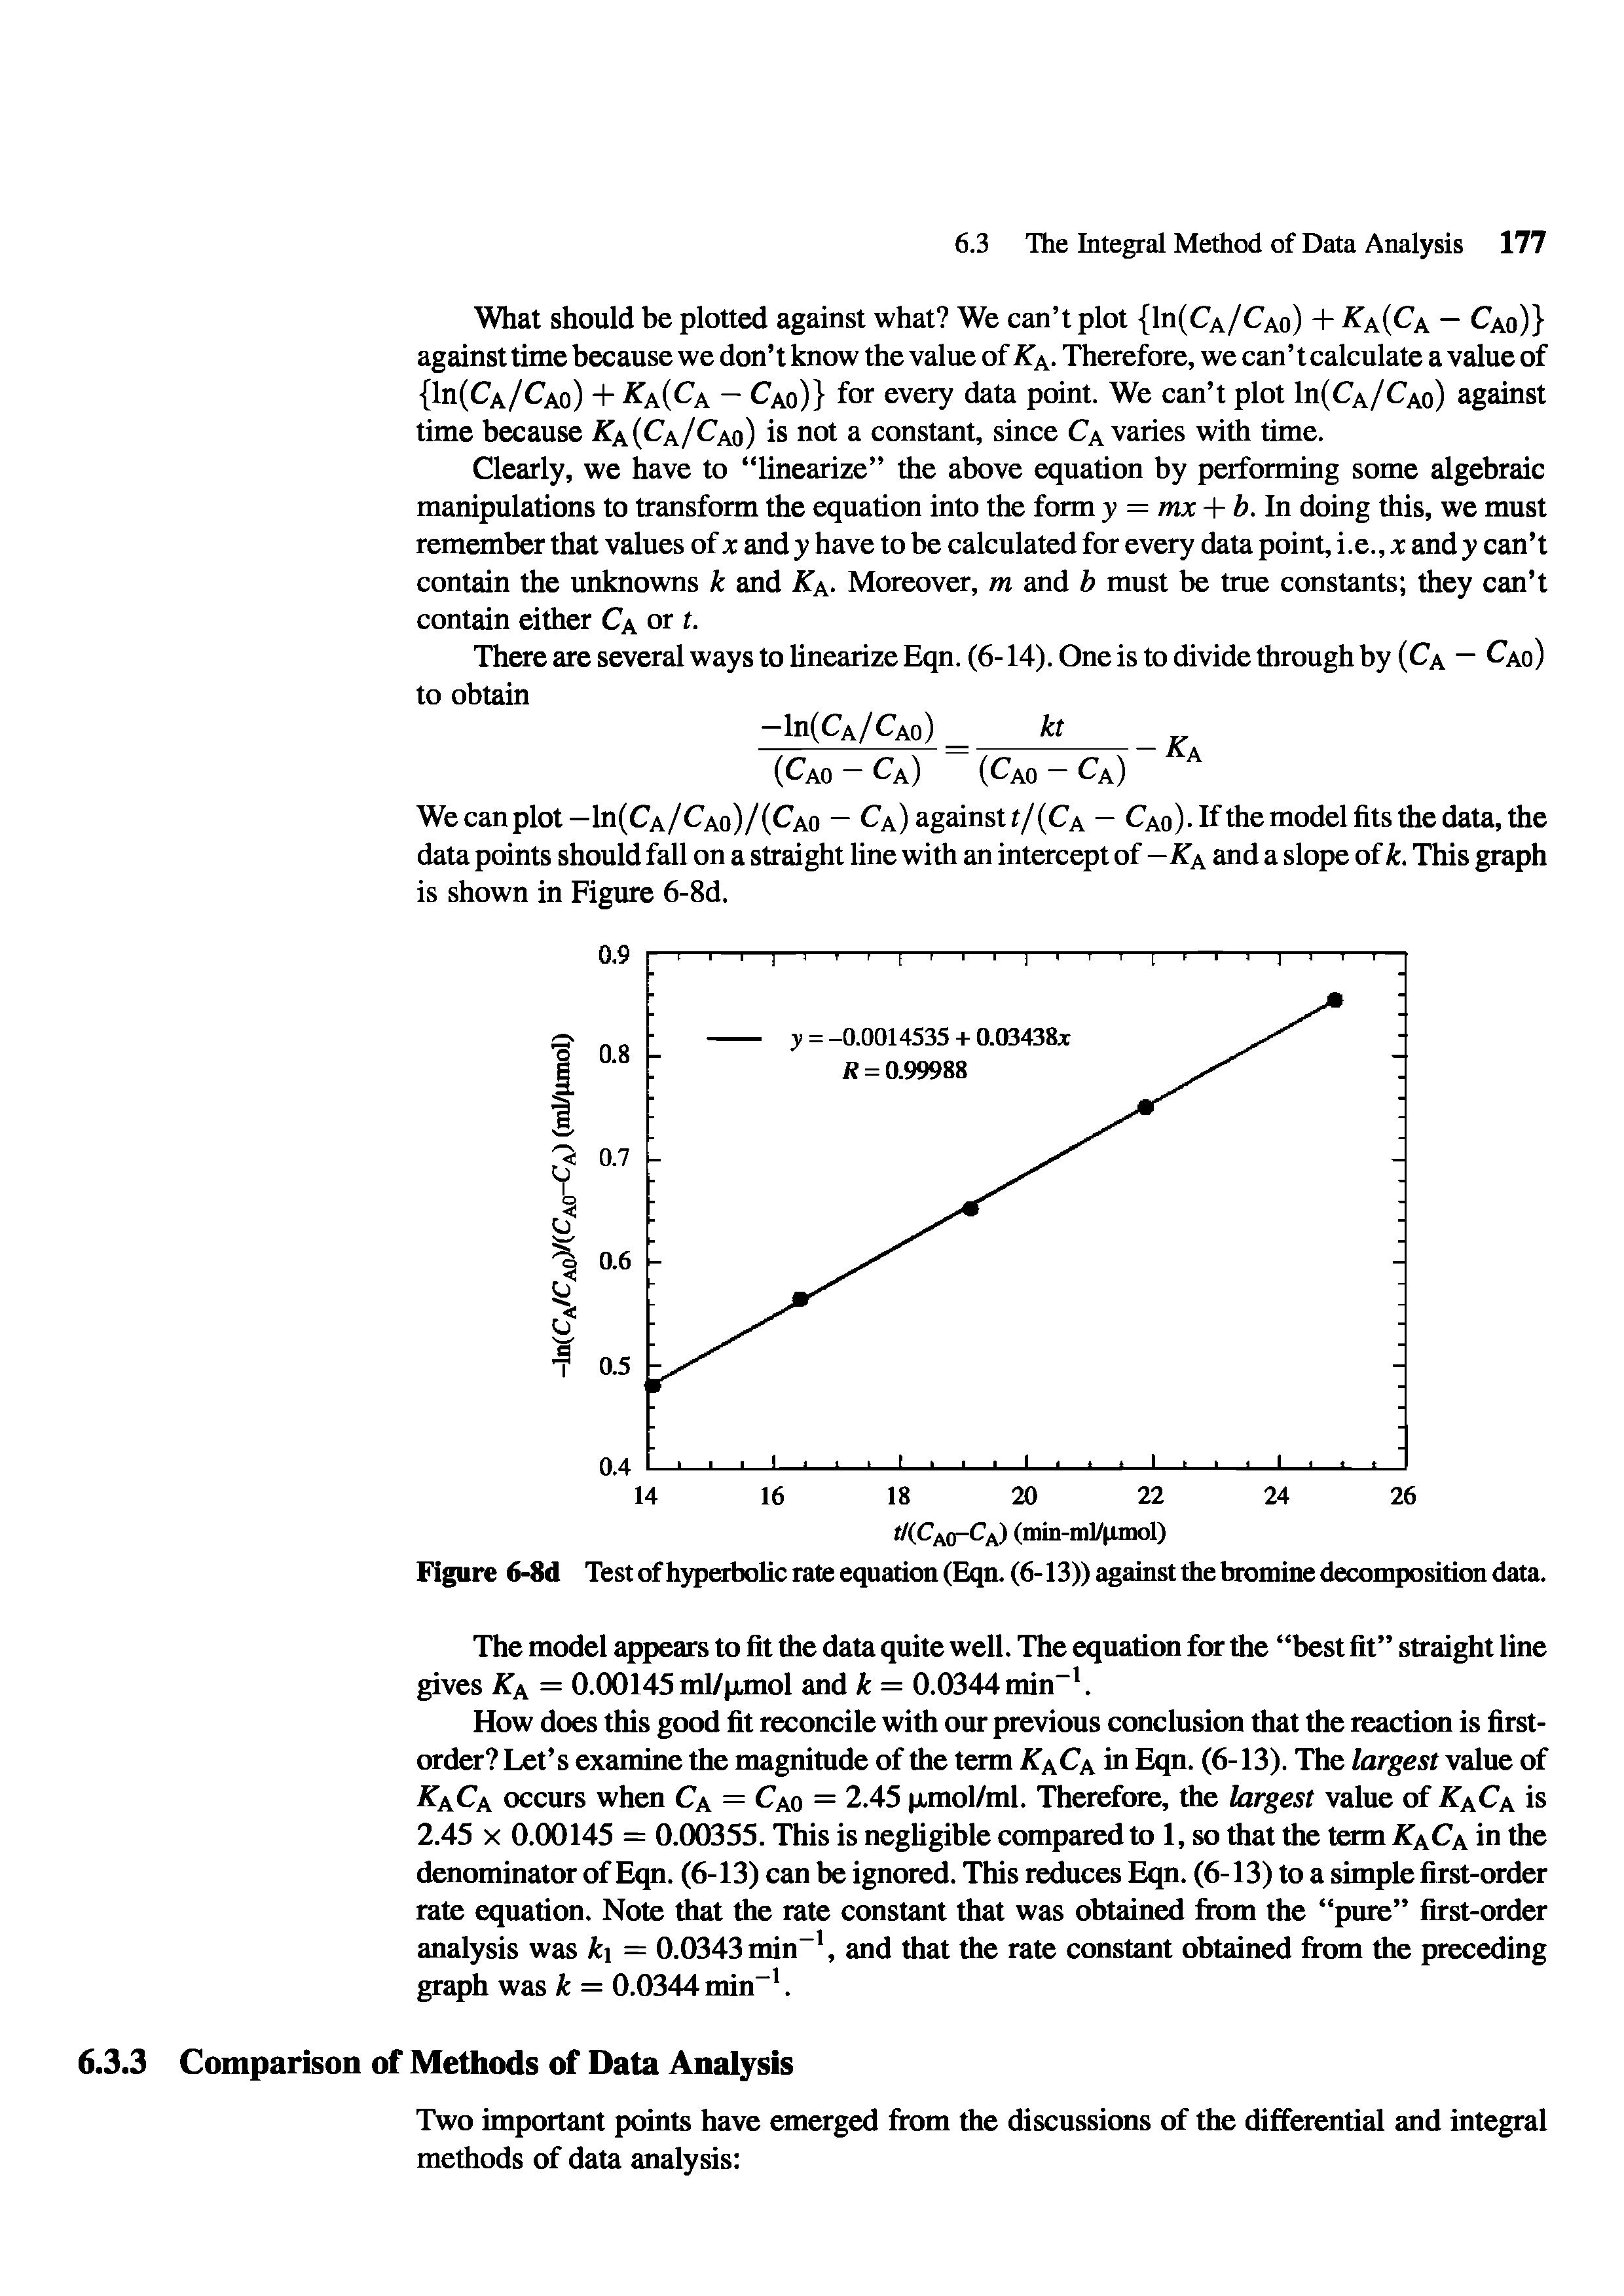 Figure 6-8d Test of hyperbolic rate equation (Eqn. (6-13)) against the bromine decomposition data.